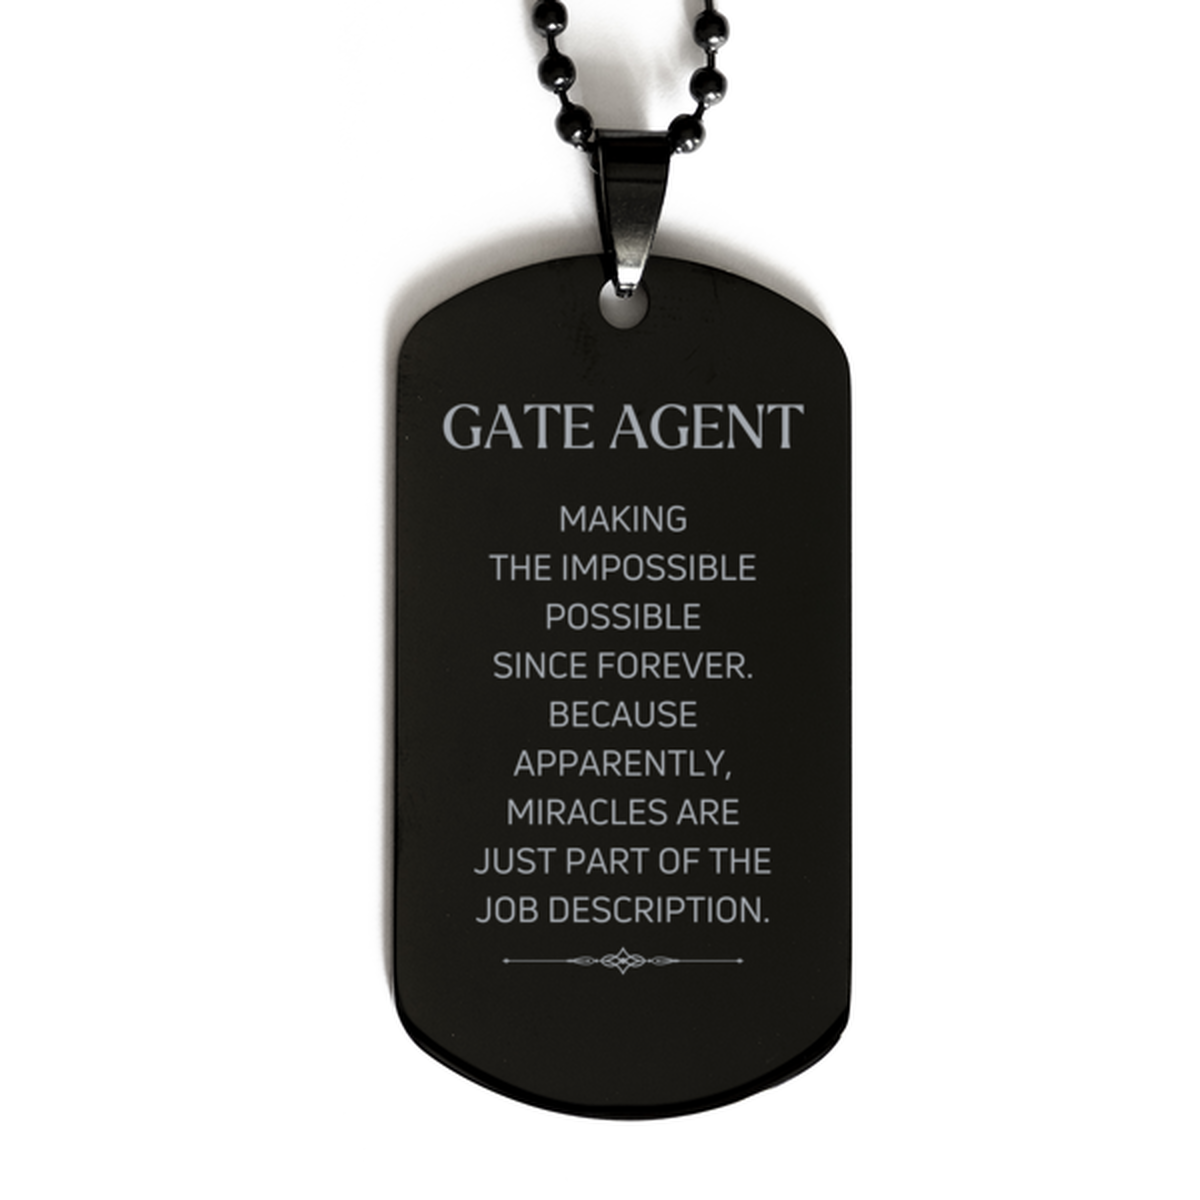 Funny Gate Agent Gifts, Miracles are just part of the job description, Inspirational Birthday Black Dog Tag For Gate Agent, Men, Women, Coworkers, Friends, Boss